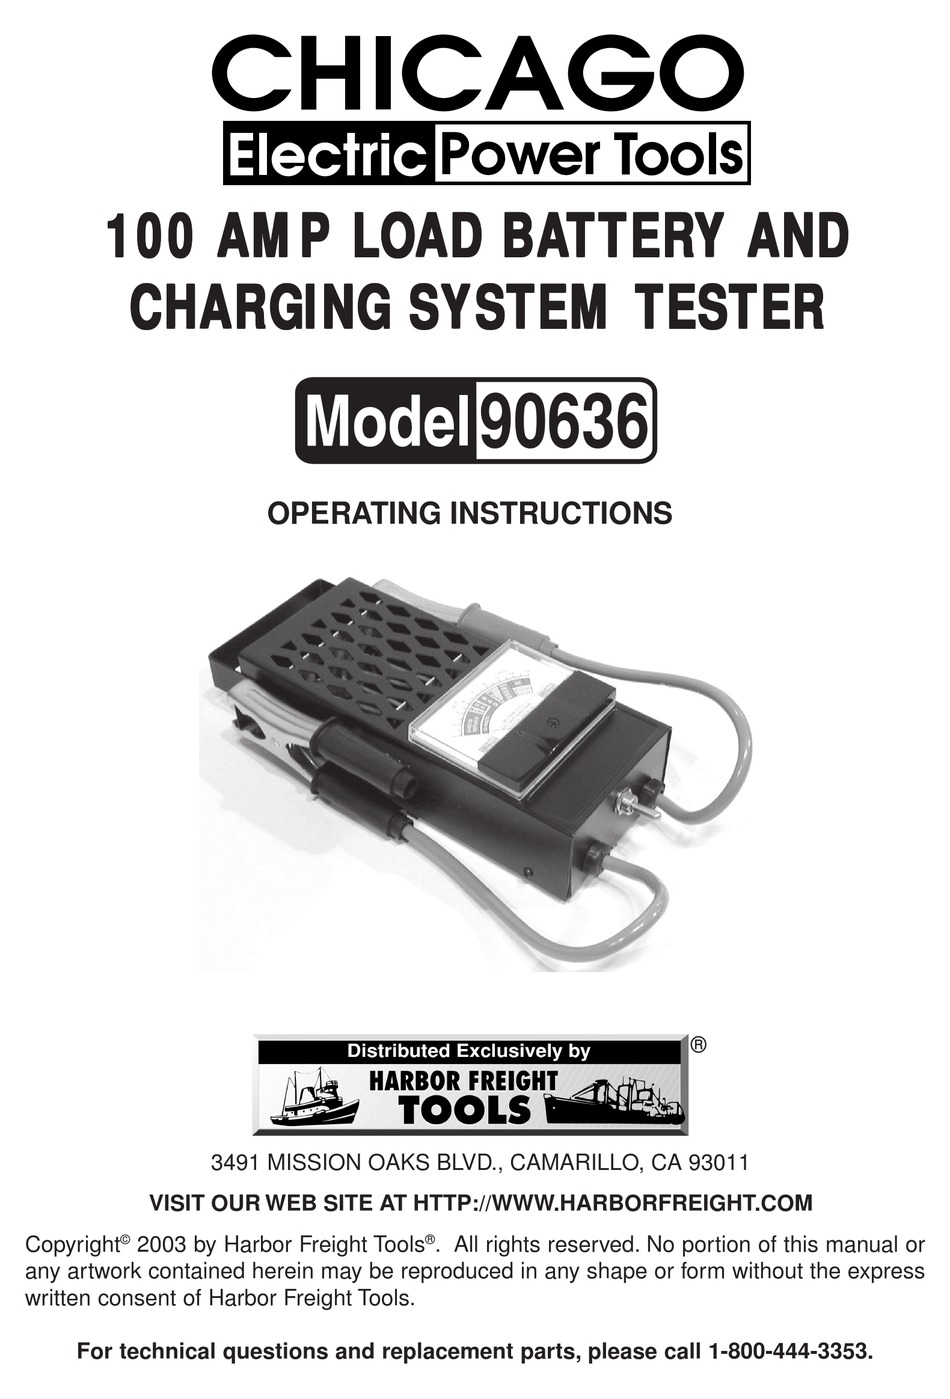 CHICAGO ELECTRIC 90636 OPERATING INSTRUCTIONS MANUAL Pdf Download